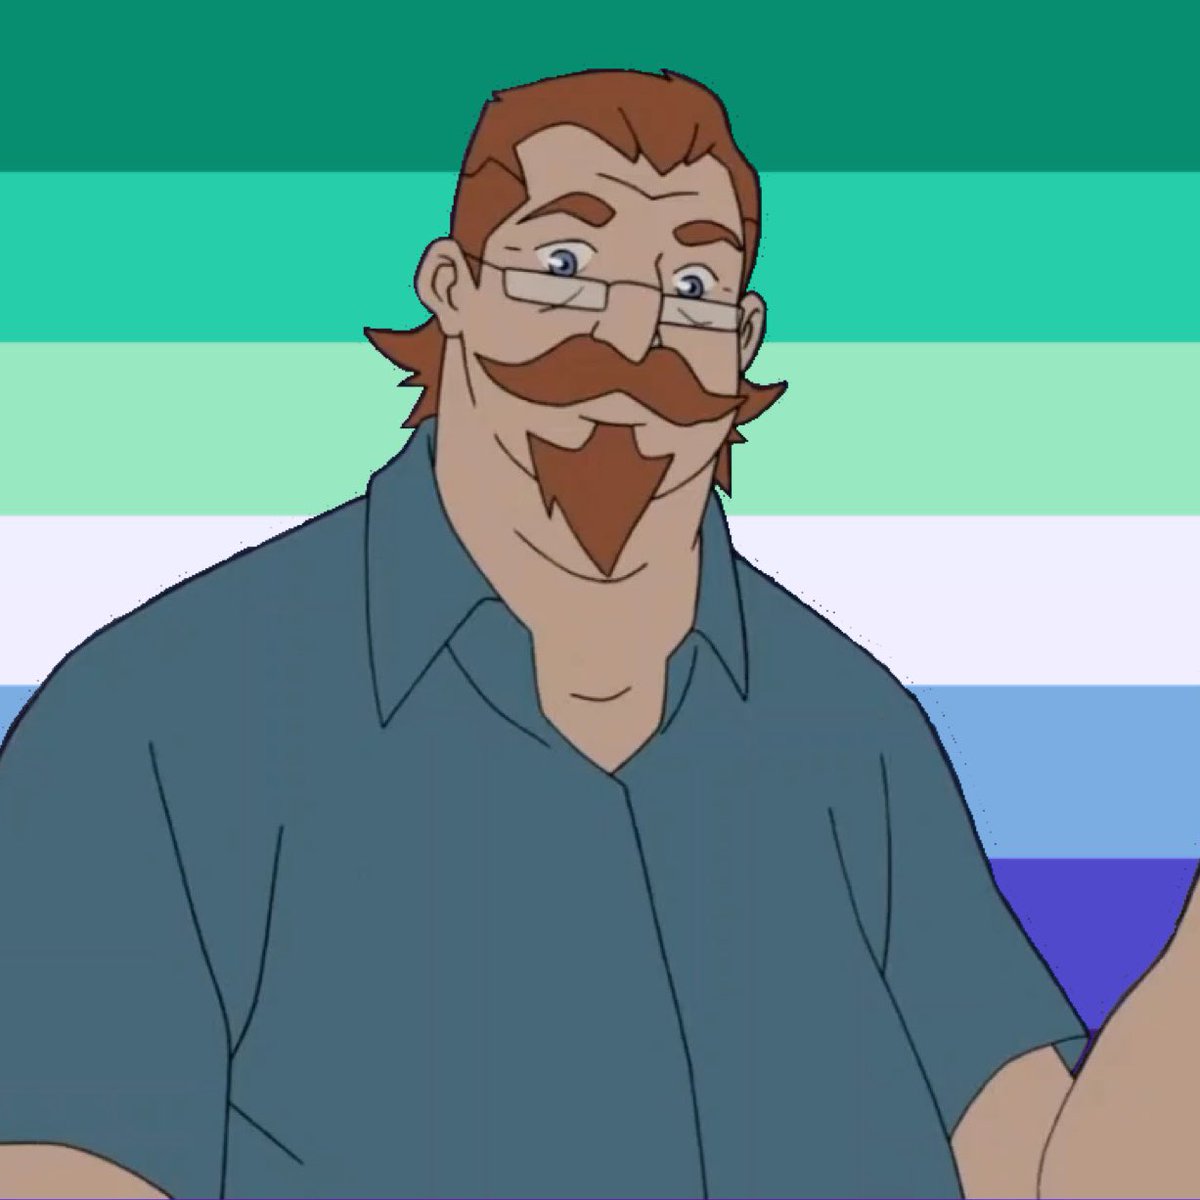 RT @faveisgay: max modell, from marvel’s spider-man (2017), is gay and trans (semi-canon)! https://t.co/vSESC6JxRC